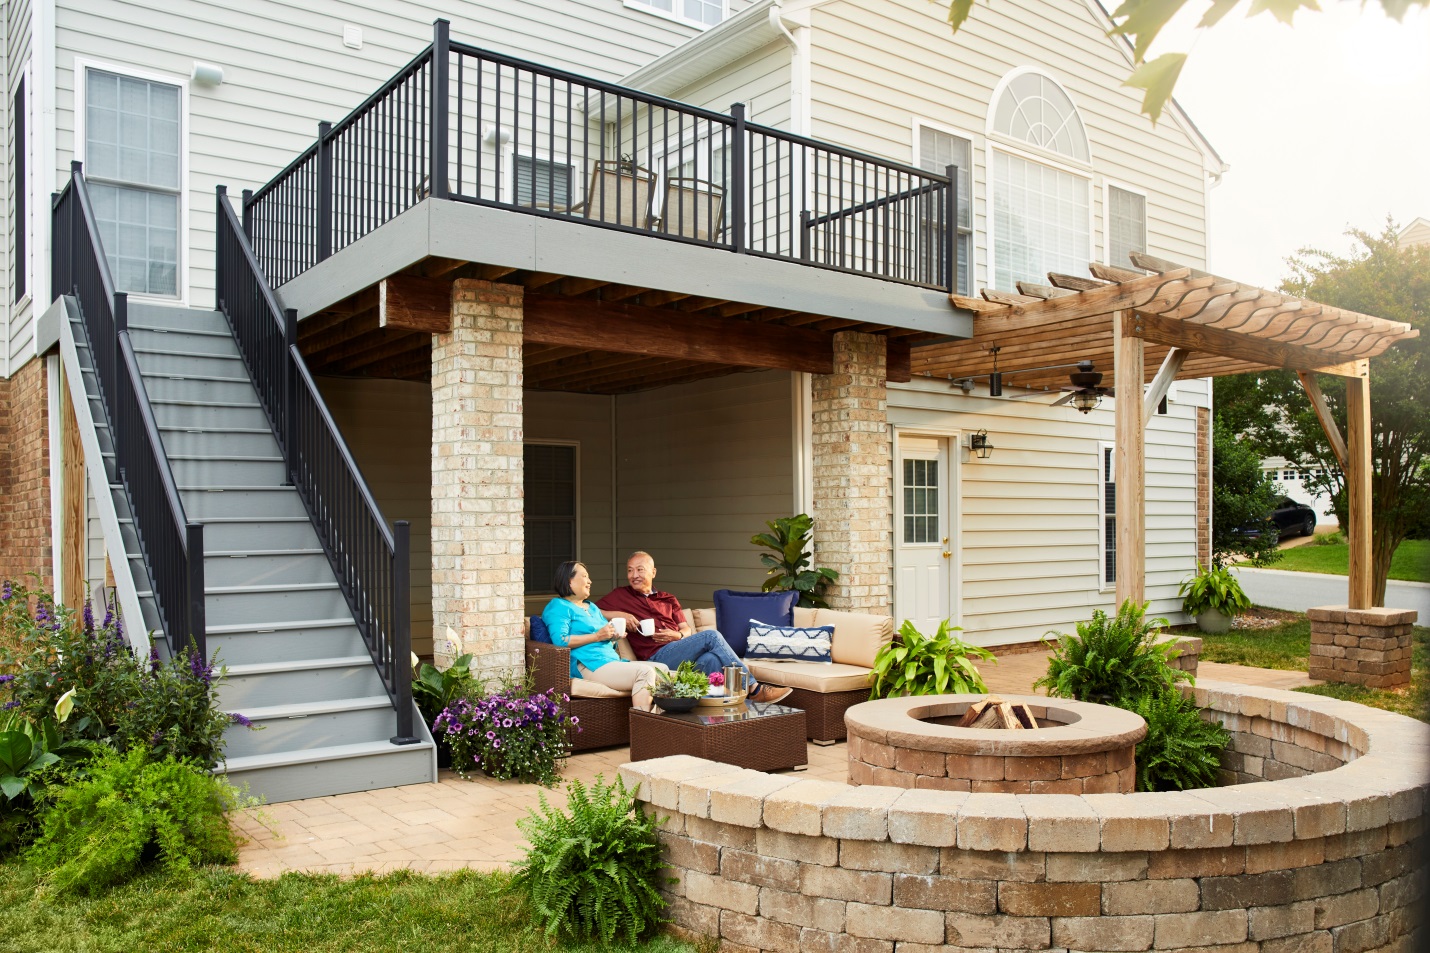 Our Flexible Payment Options Can Help Make Your Backyard Dream A Reality.